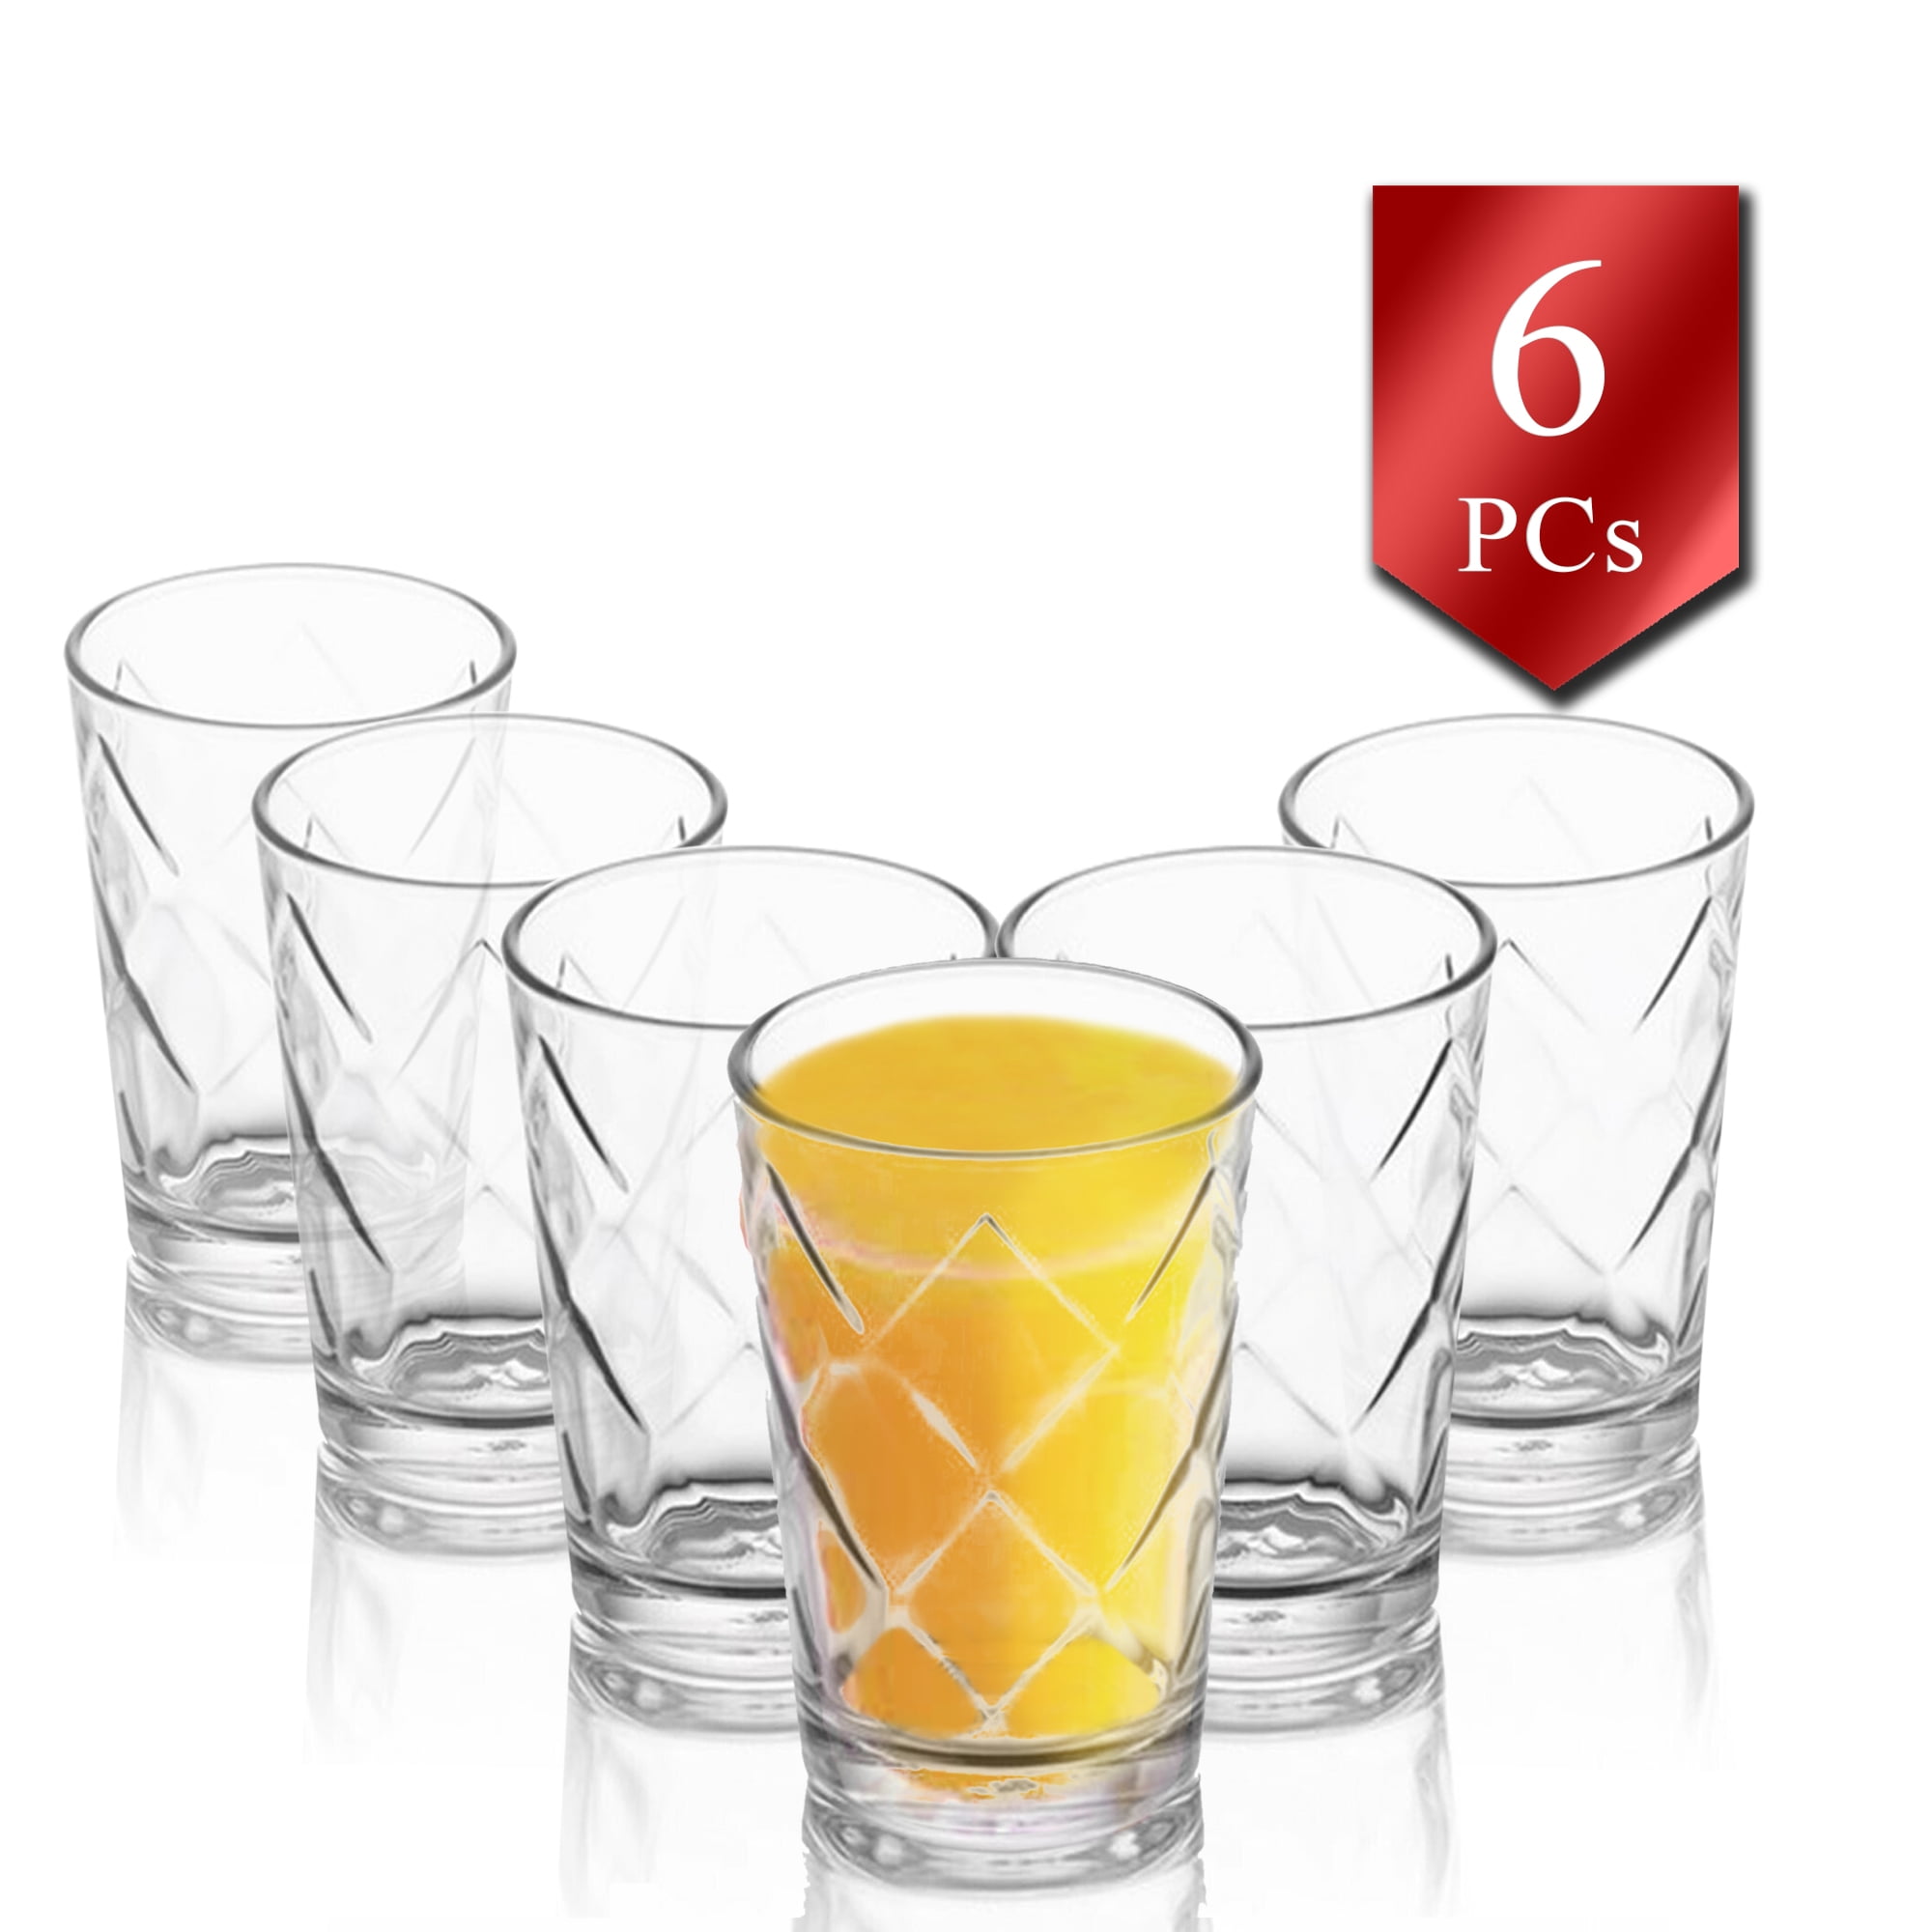 Love Design Juice glass 6 ounce Capacity set of 6 Clear Color Water Cup 